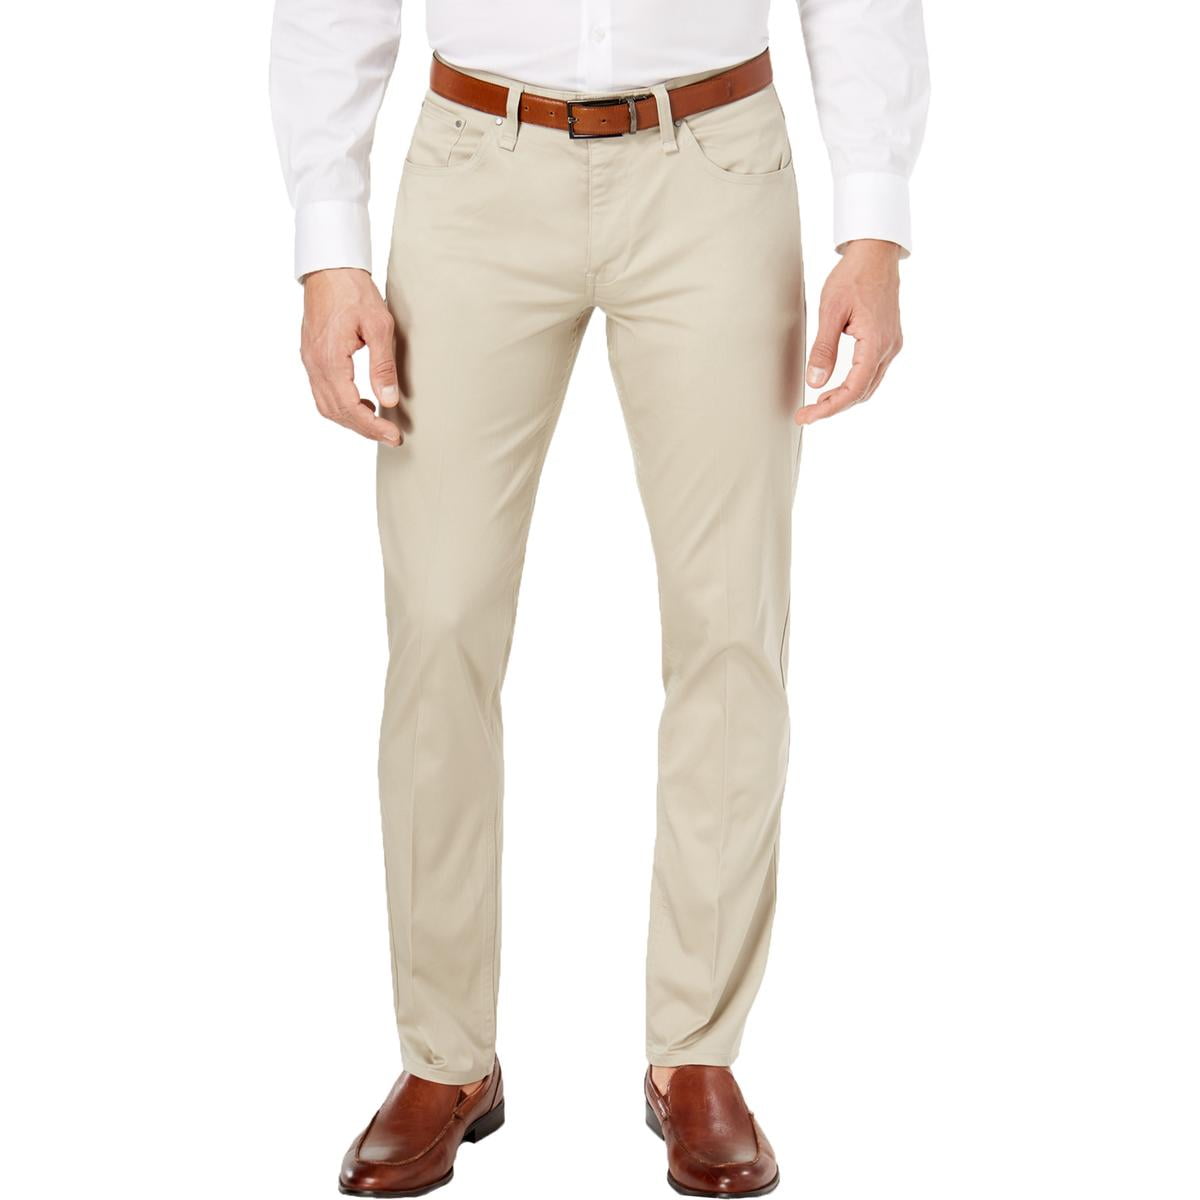 Griffin,32x30 Tommy Hilfiger Men's Tailored Fit Flat Front Chino Pants 